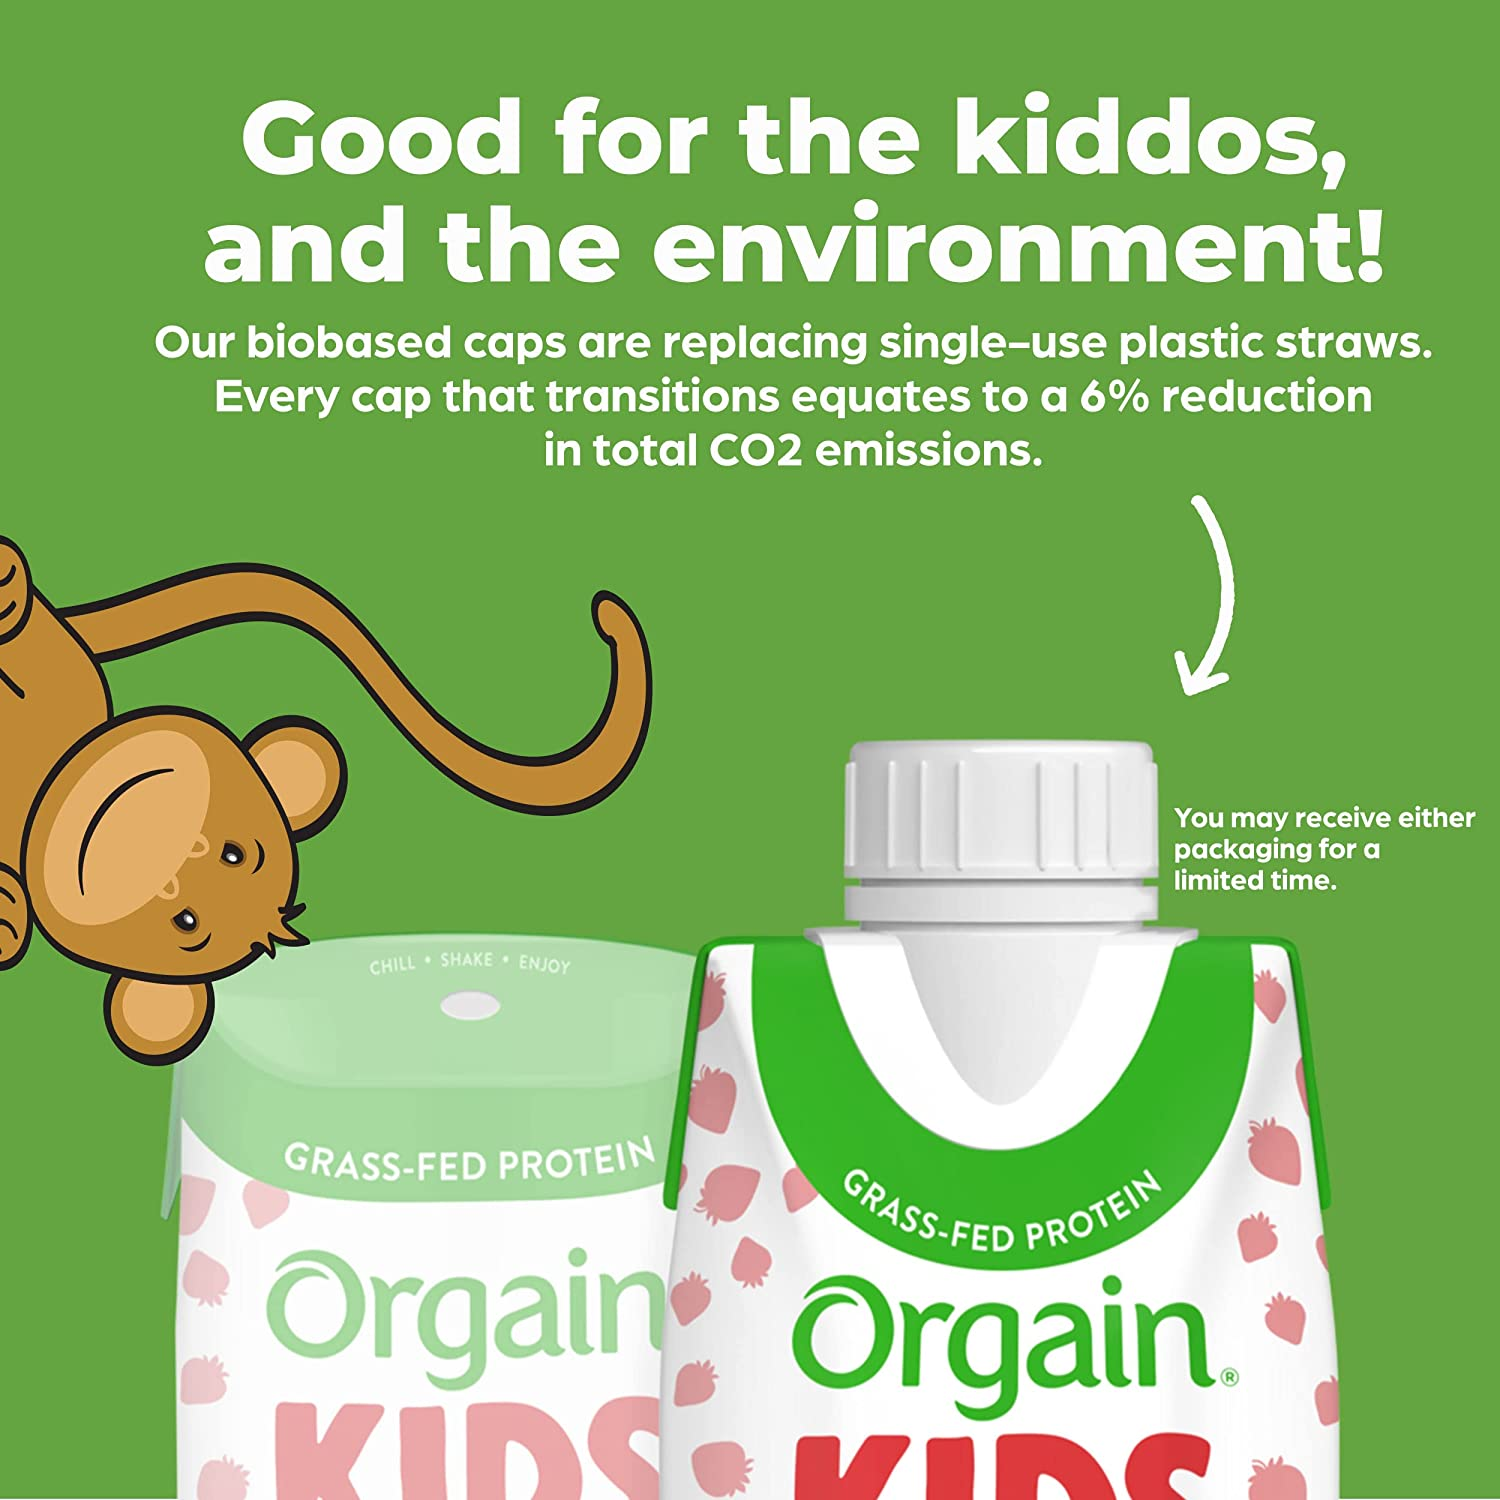 Orgain Organic Kids Protein Nutritional Shake, Strawberry - 8G of Protein, 22 Vitamins & Minerals, Fruits & Vegetables, Gluten Free, Soy Free, Kosher, Non-Gmo, 8.25 Oz, 12 Ct (Packaging May Vary)